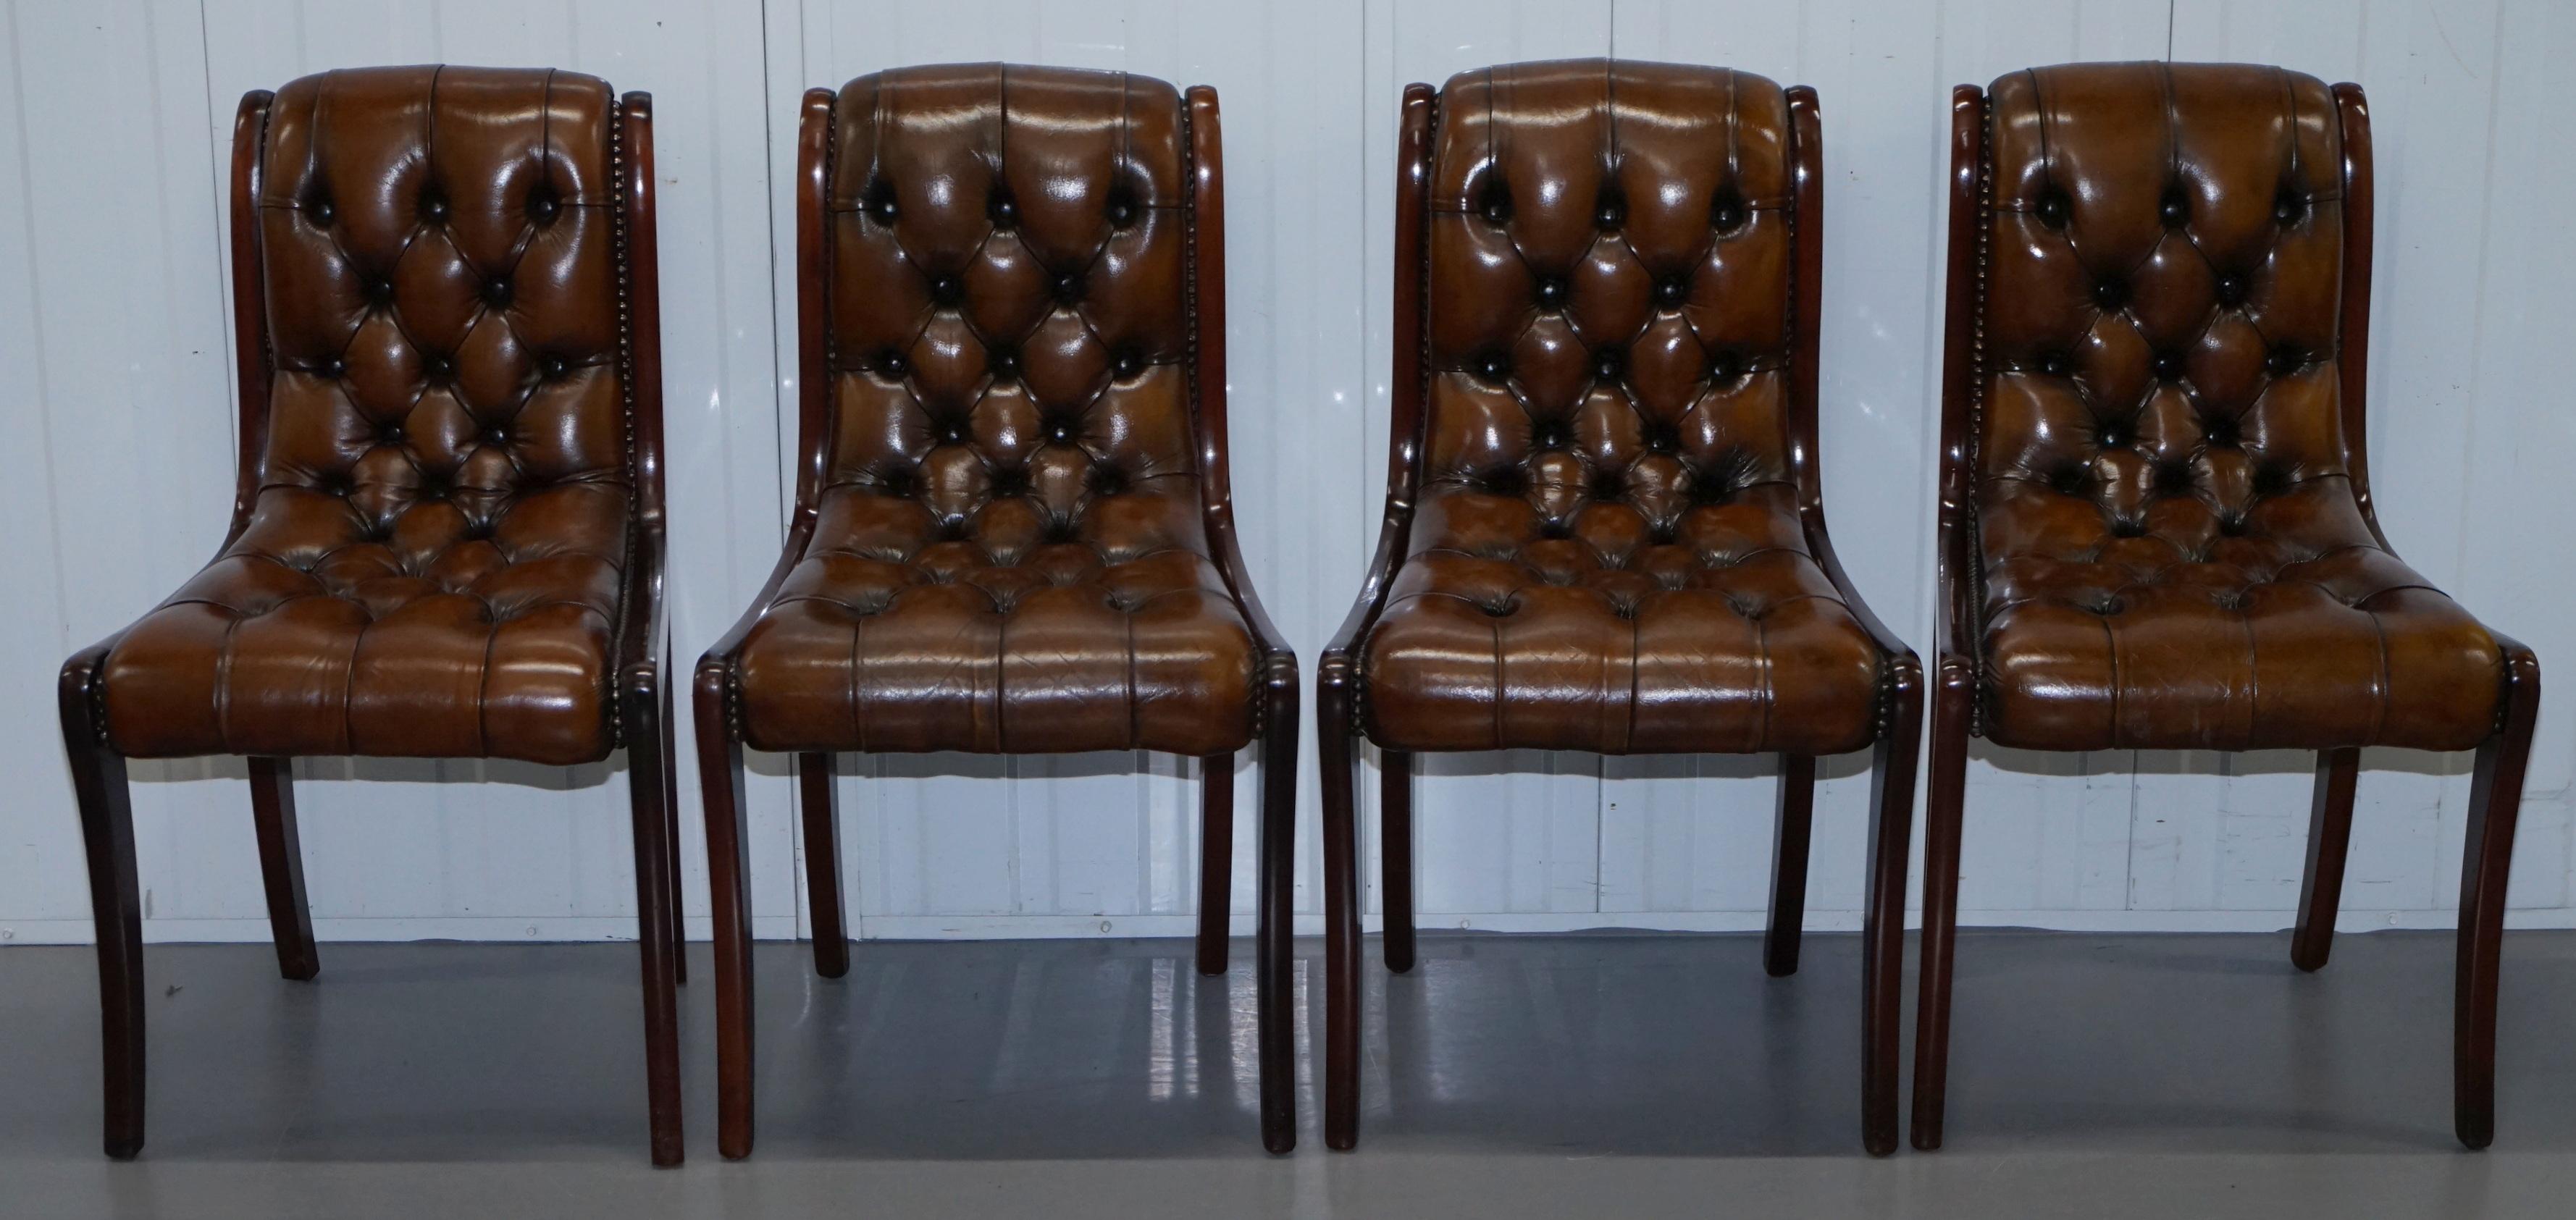 We are delighted to this rare set of six fully restored hand dyed Whisky brown leather Chesterfield dining chairs

I have another set of ten of these chairs listed under my other items that are exactly the same, if you need a set of eight I can